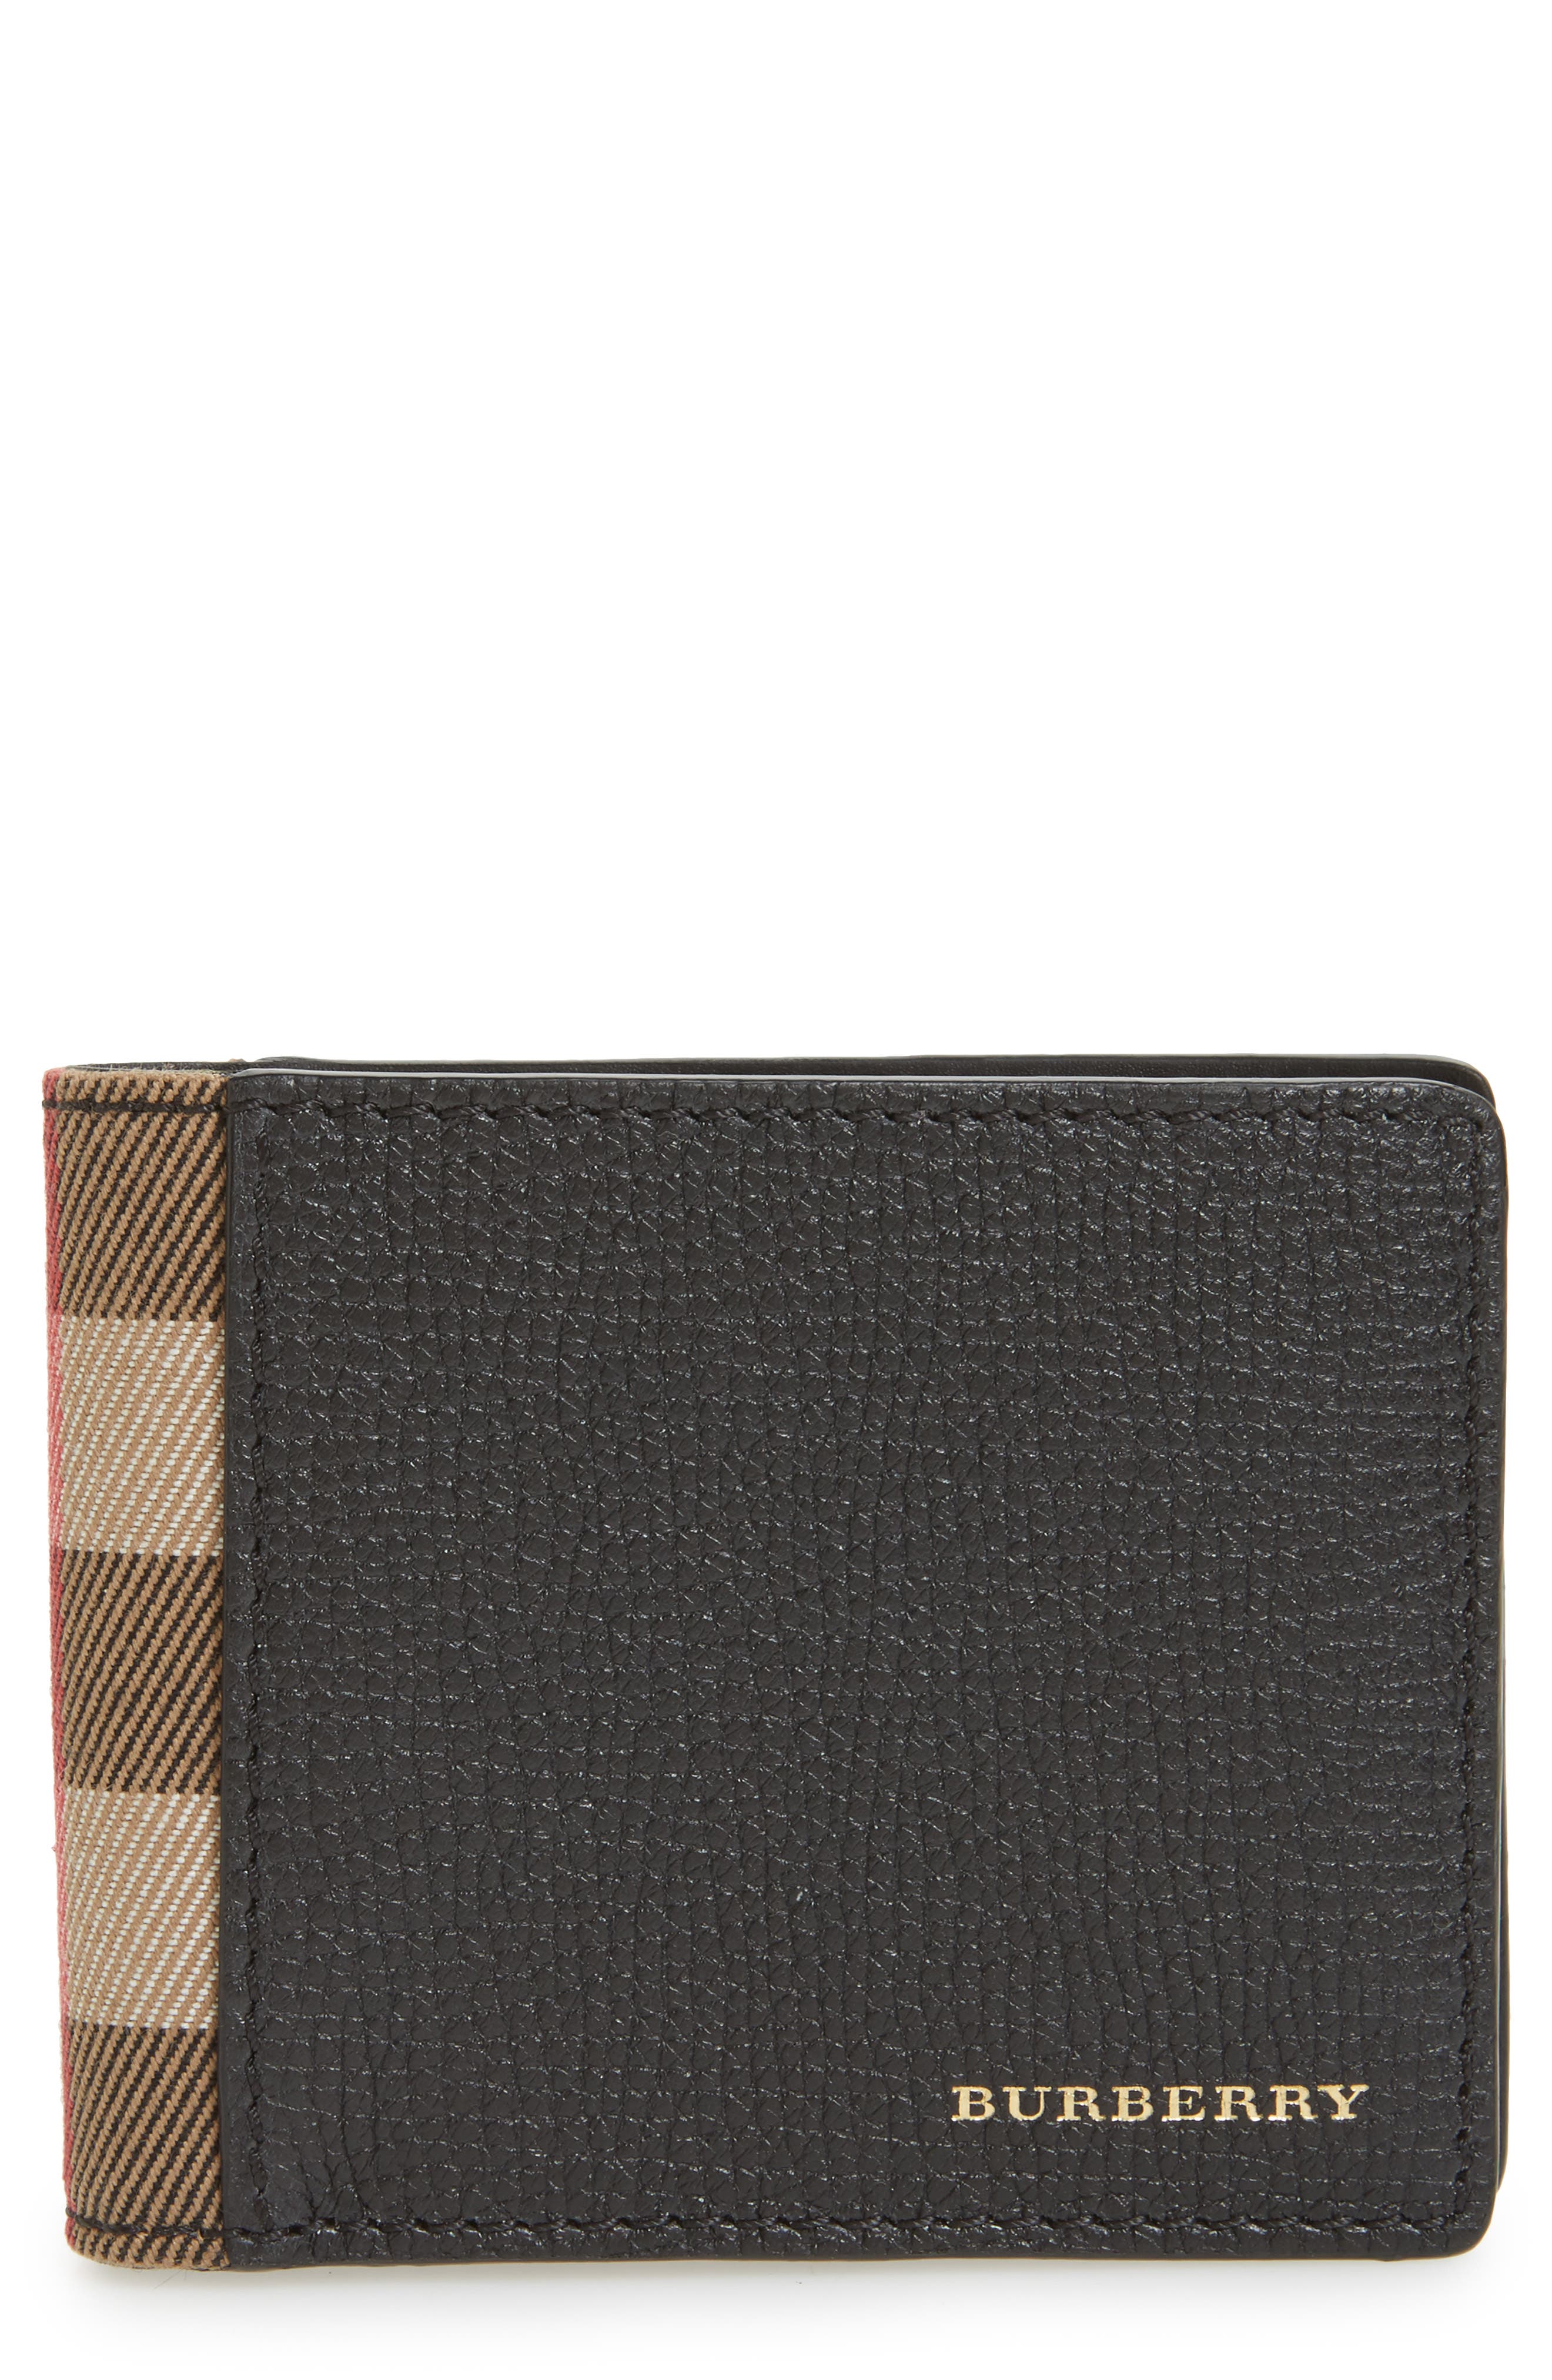 Burberry Check Leather Wallet | Nordstrom